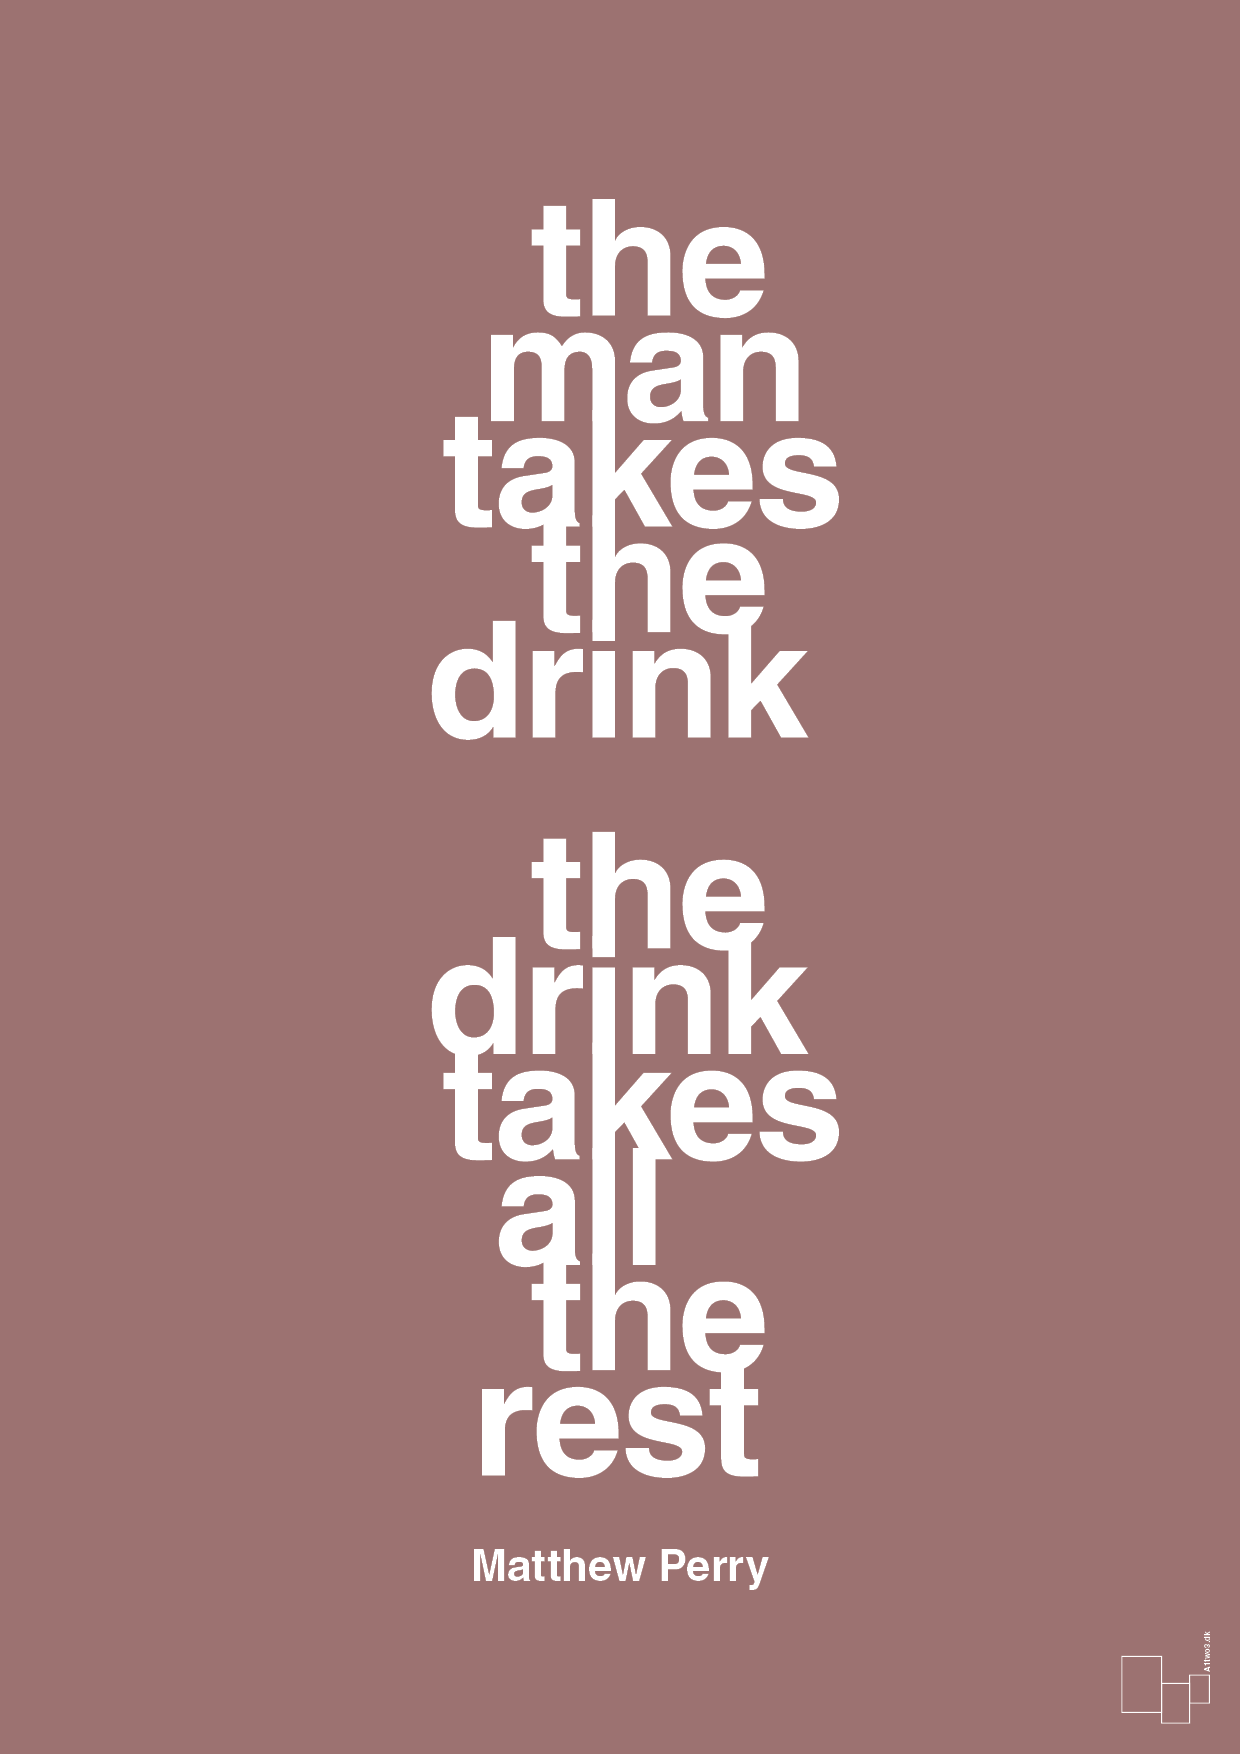 the man takes the drink the drink takes all the rest - Plakat med Citater i Plum